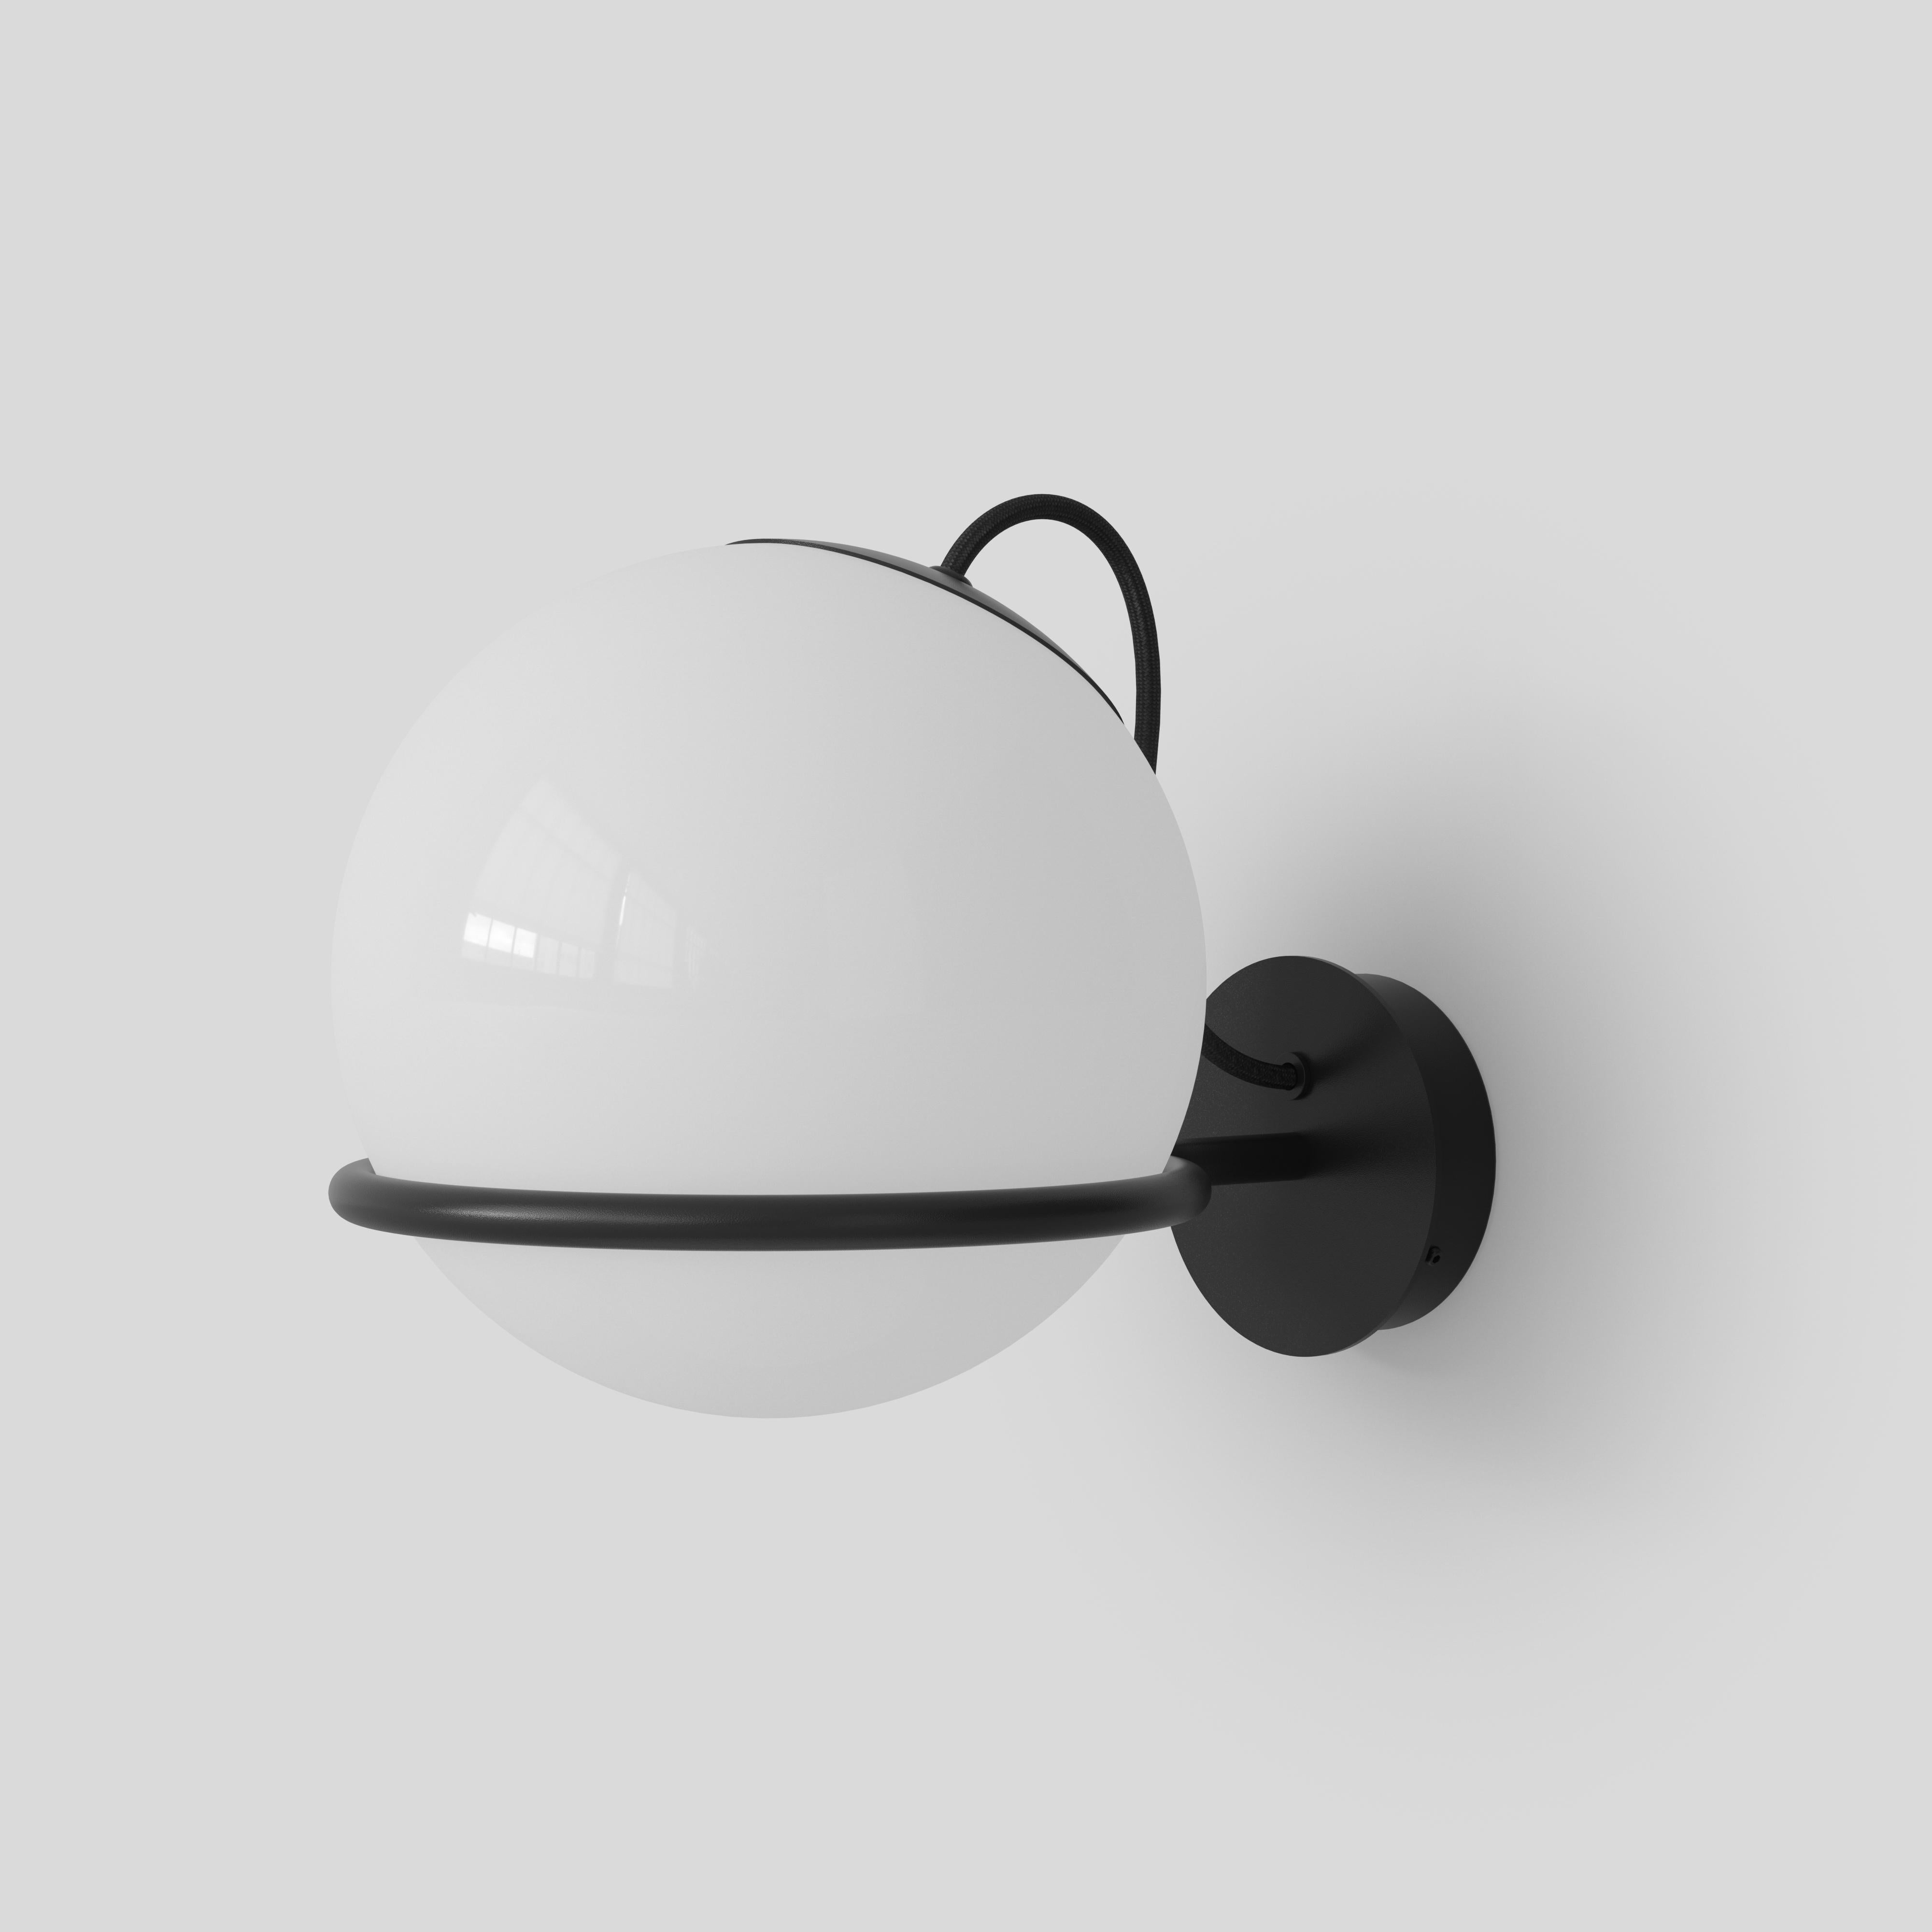 Model 237/1
Design by Gino Sarfatti
The single blown opaline glass sphere is gently held by a Black or Champagne painted aluminium ring. The aluminum ring has a small cut, enabling the sphere to be placed facing downward or upward and thus